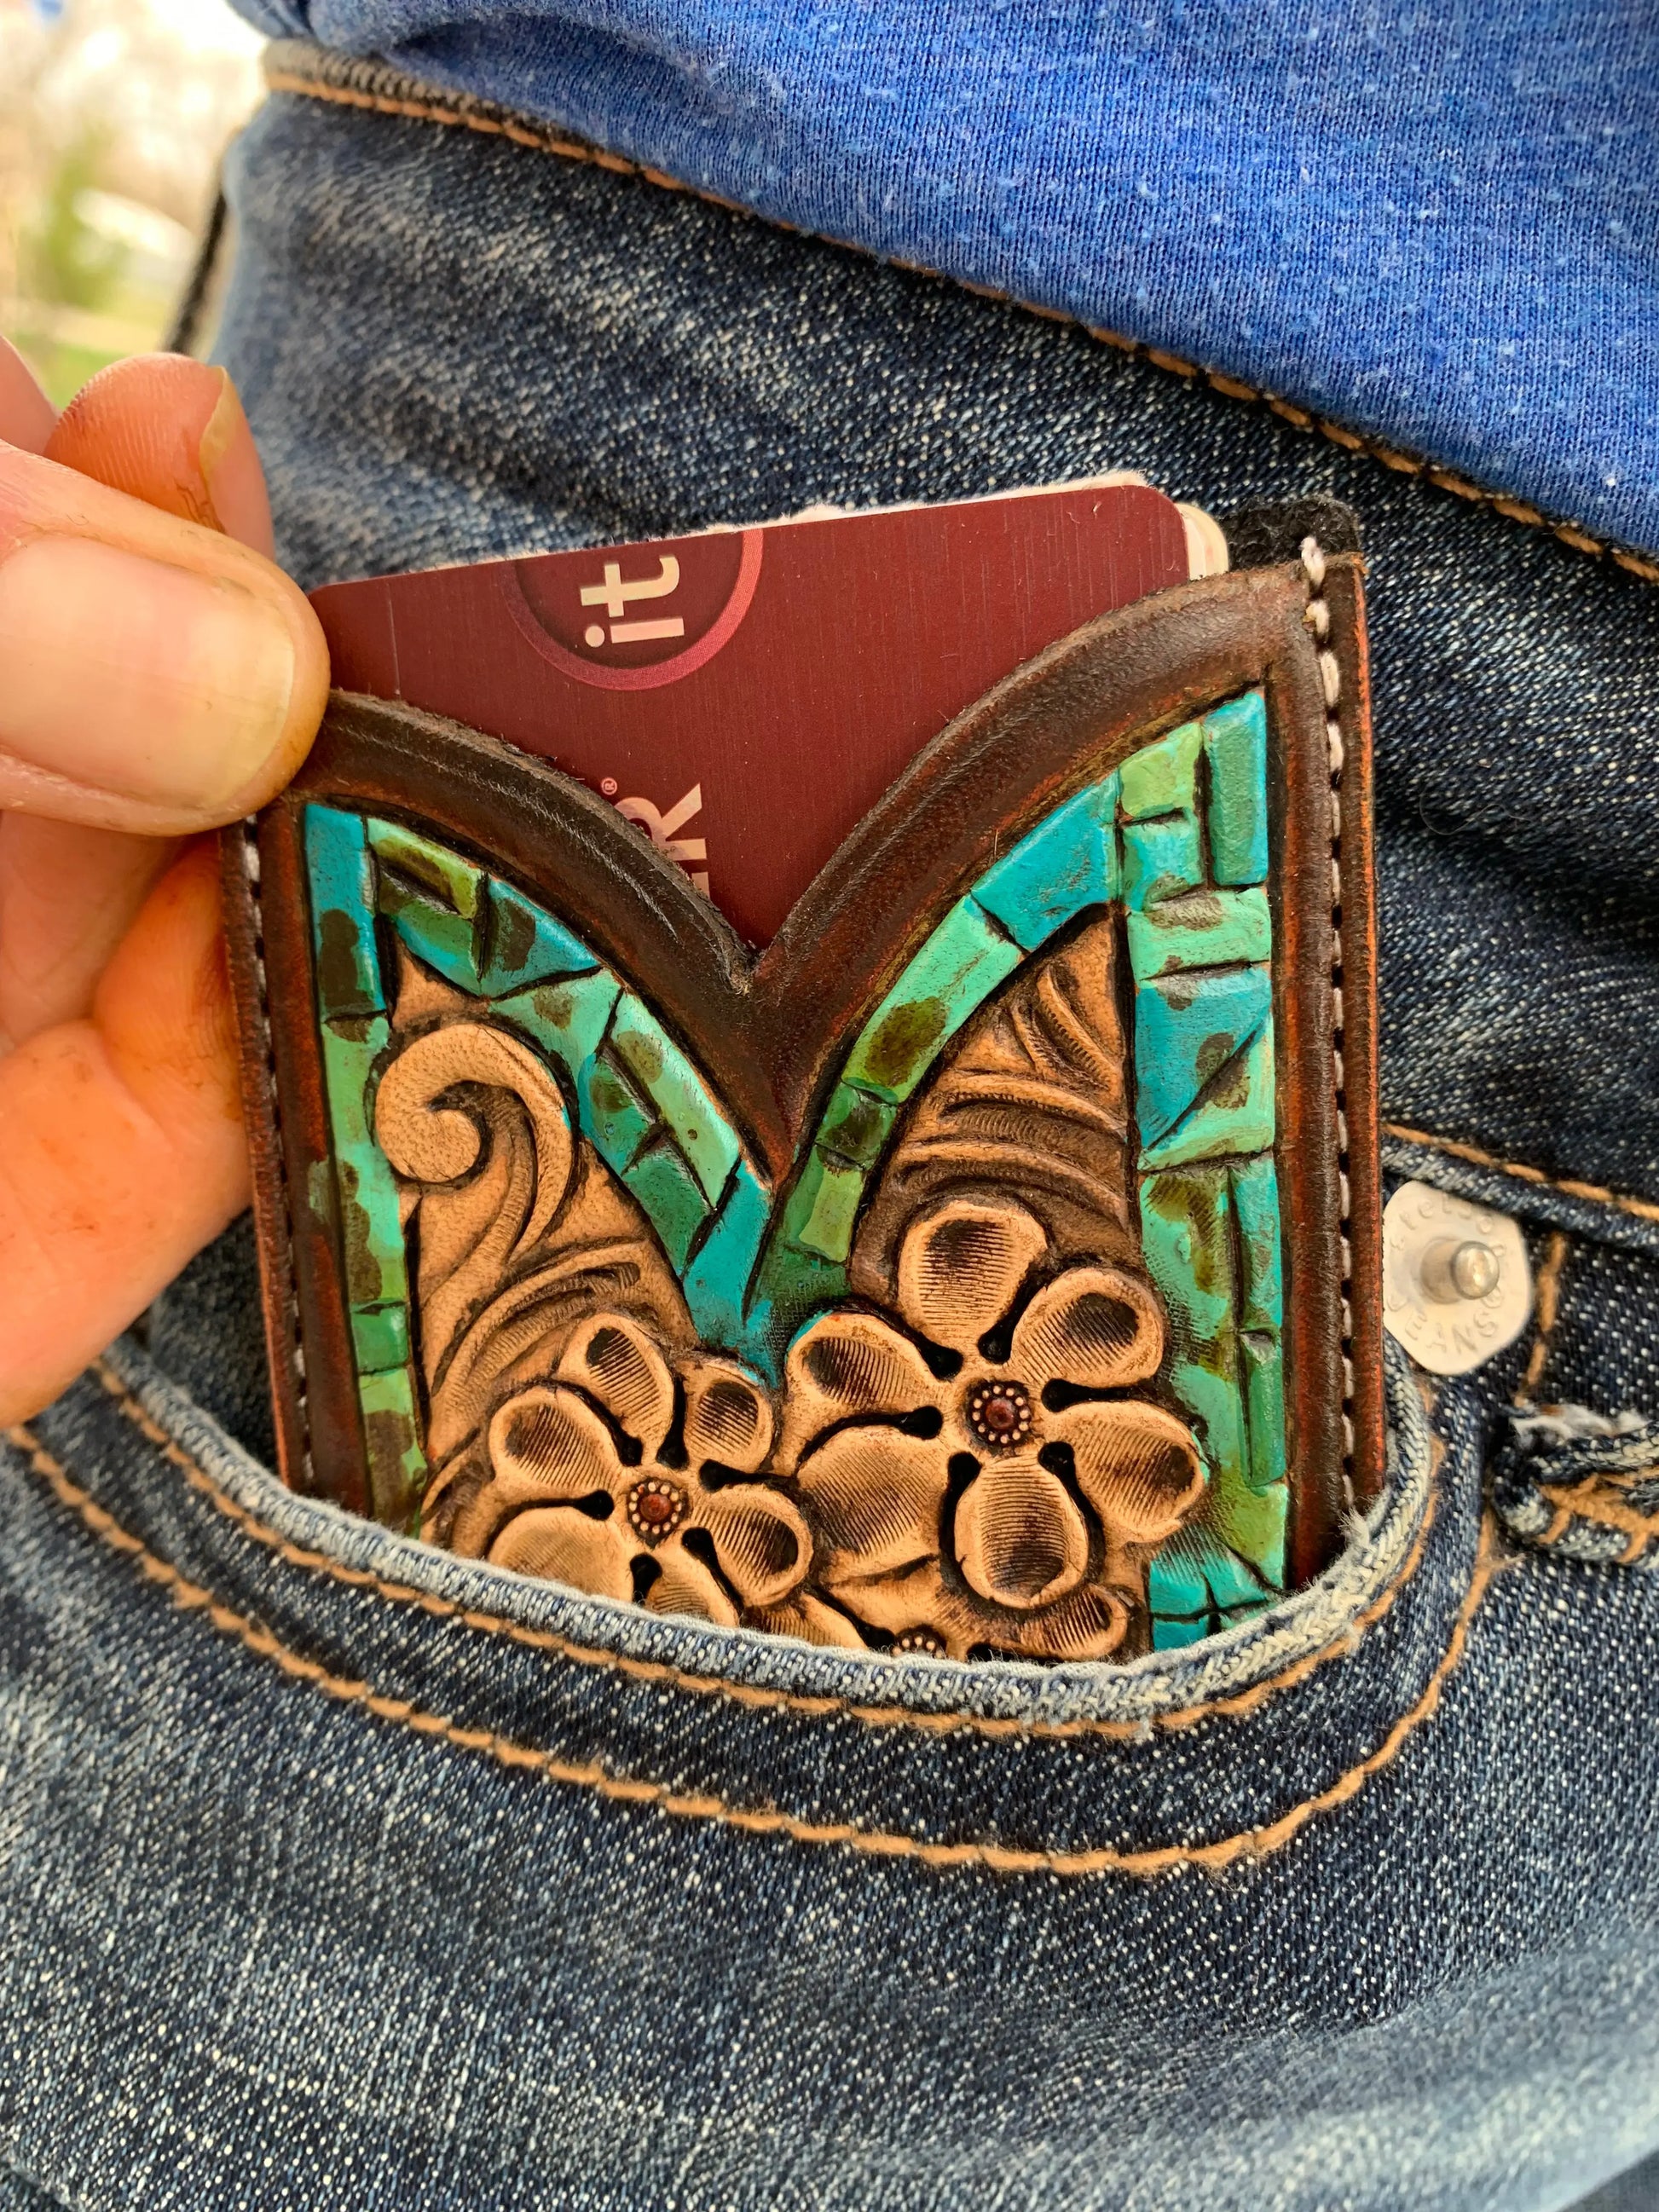 Turquoise Tooled Leather Wallet